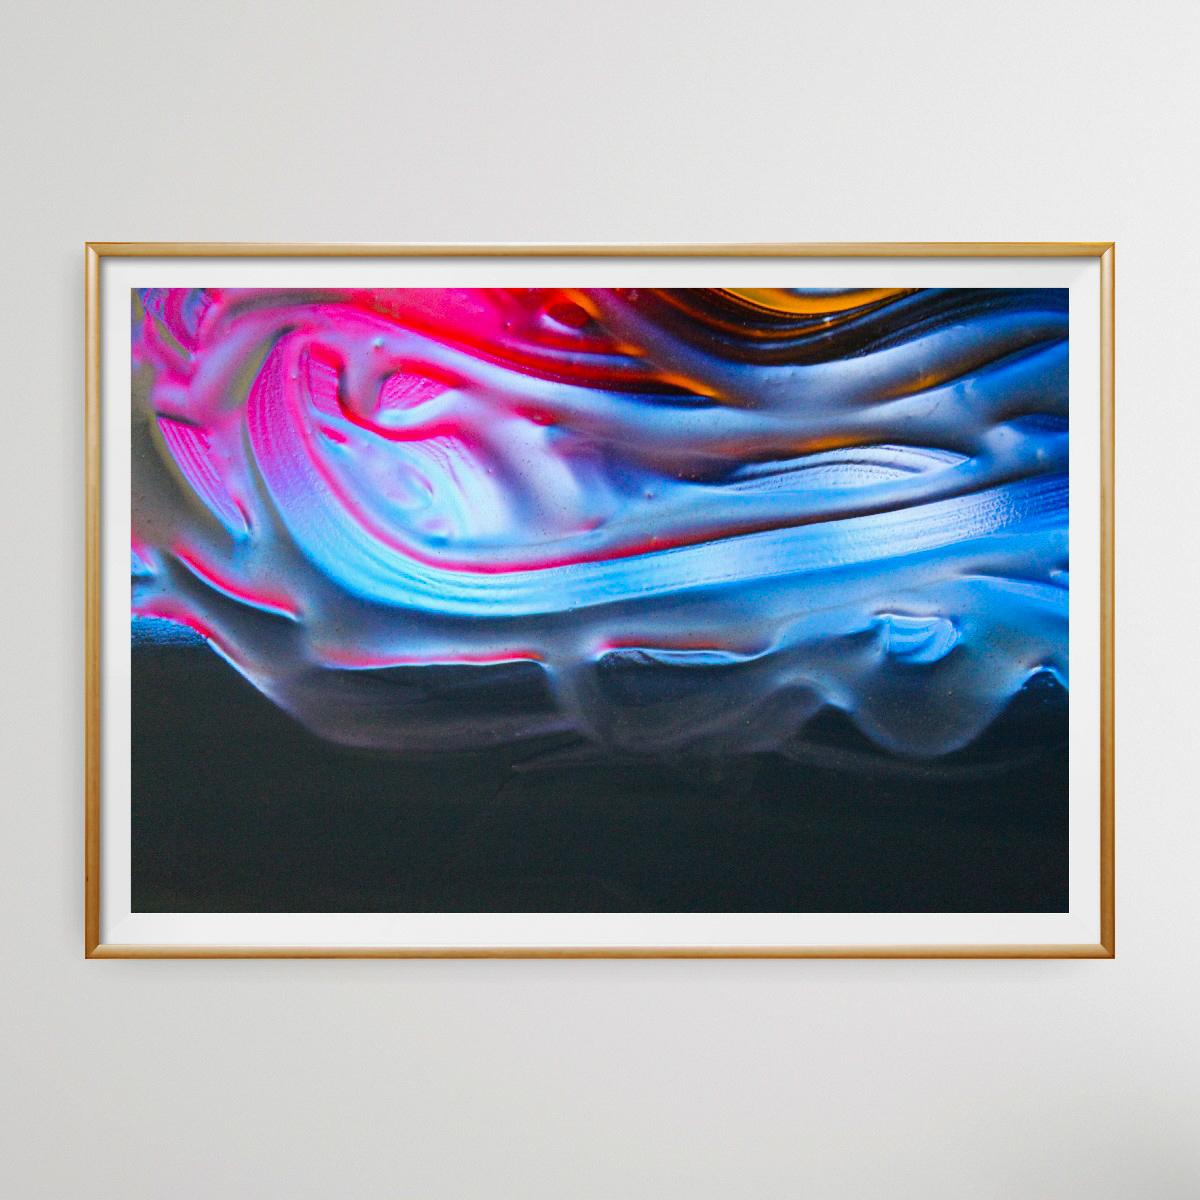 A self-taught painter, Serigne Niang is fascinated by colour. It is by combining photographic techniques and pictorial processes that he has created the originality of his artistic work.  An abstract expressionist and minimalist artist, as he